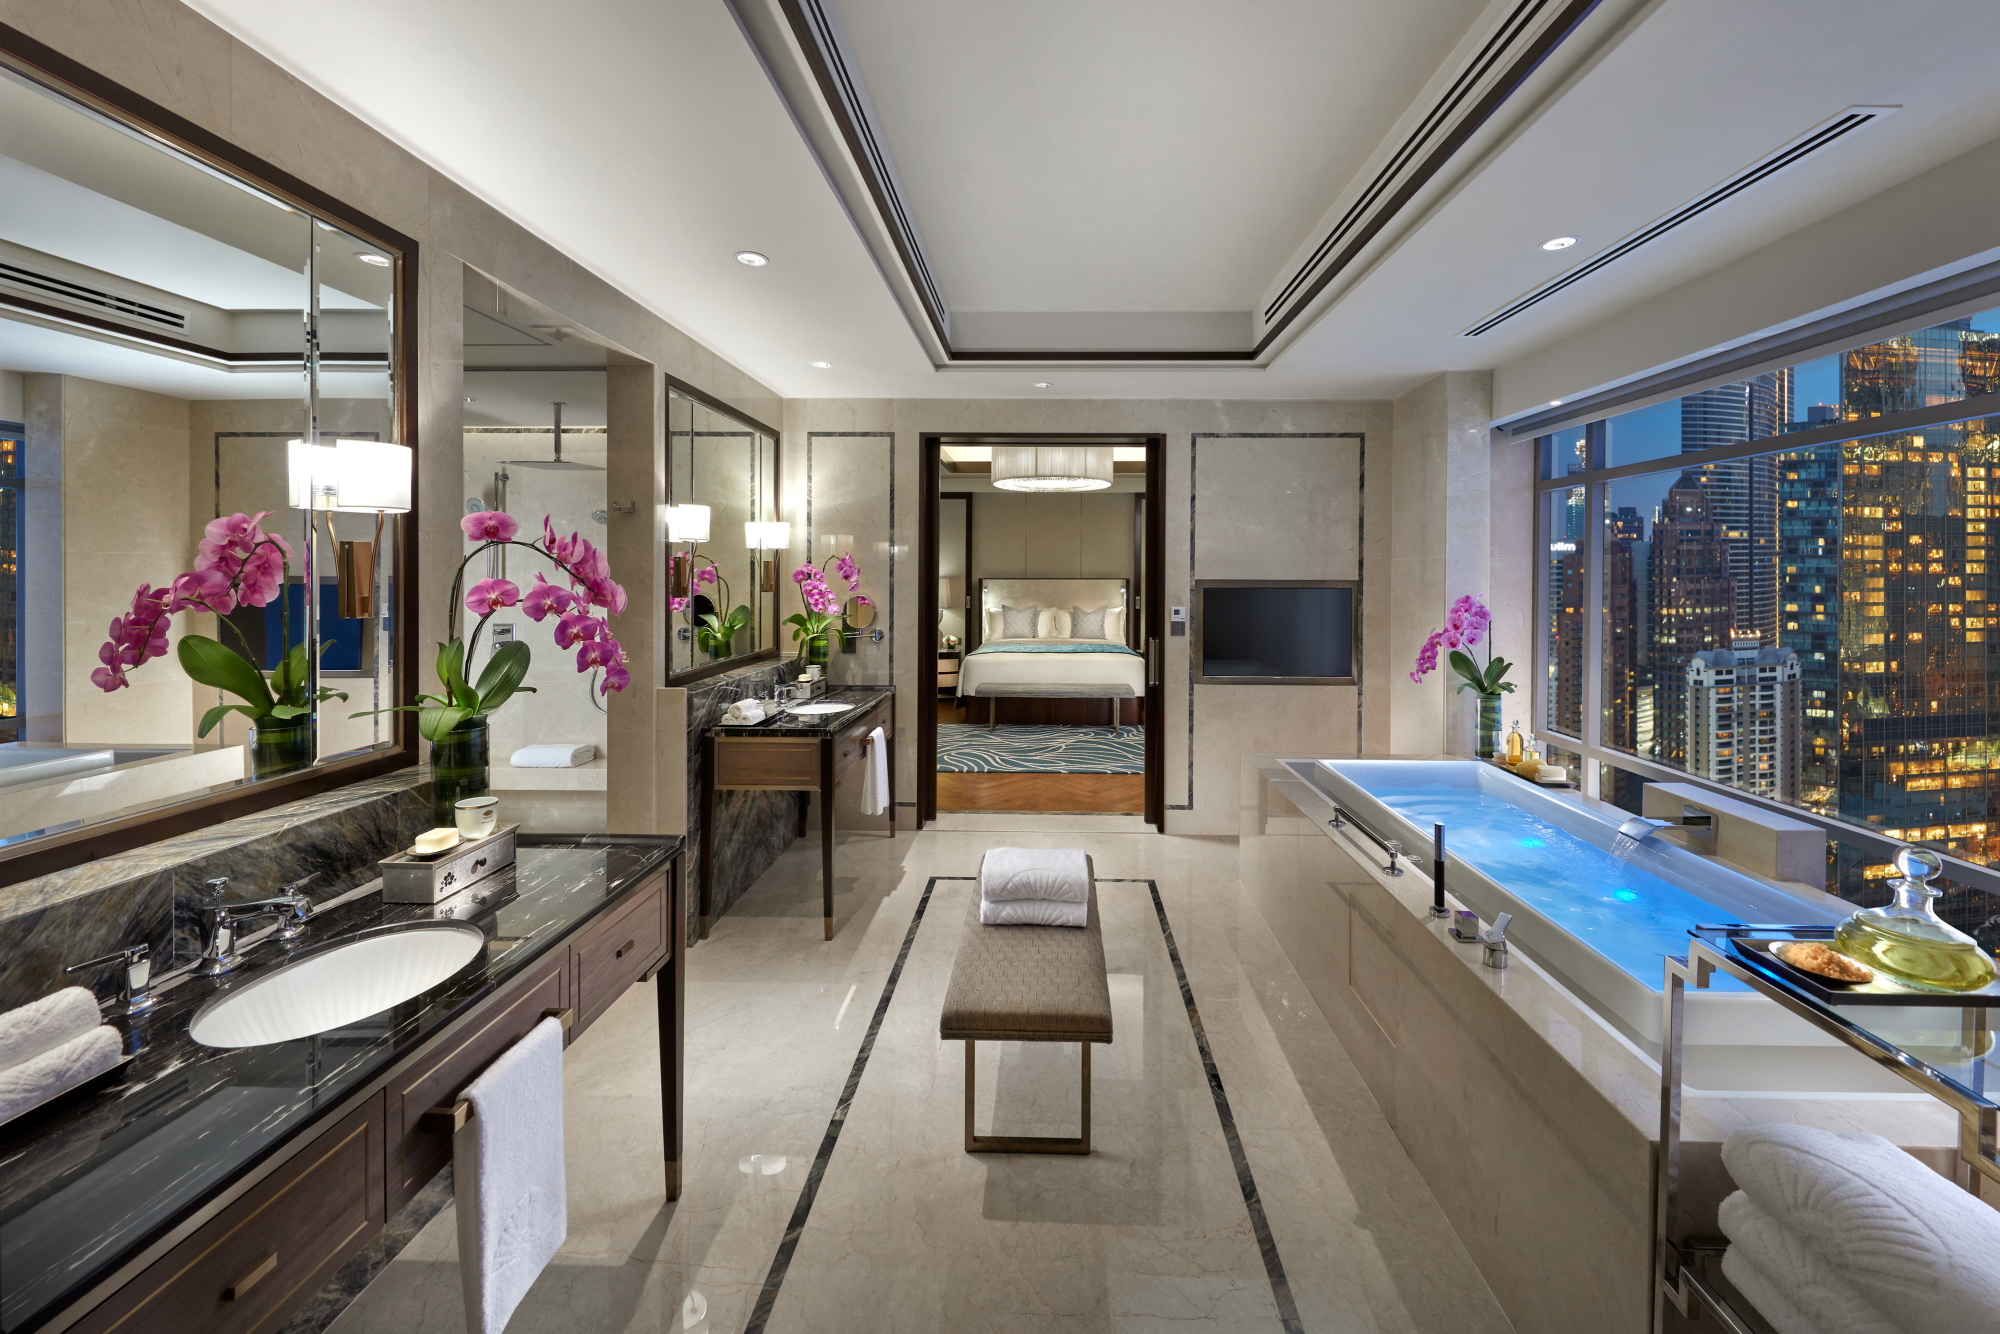 The marble master bathroom of the Presidential Suite at the Mandarin Oriental Kuala Lumpur features an expansive infinity edge bath that overlooks the city lights and features his and her vanity units and showers. Click to enlarge.